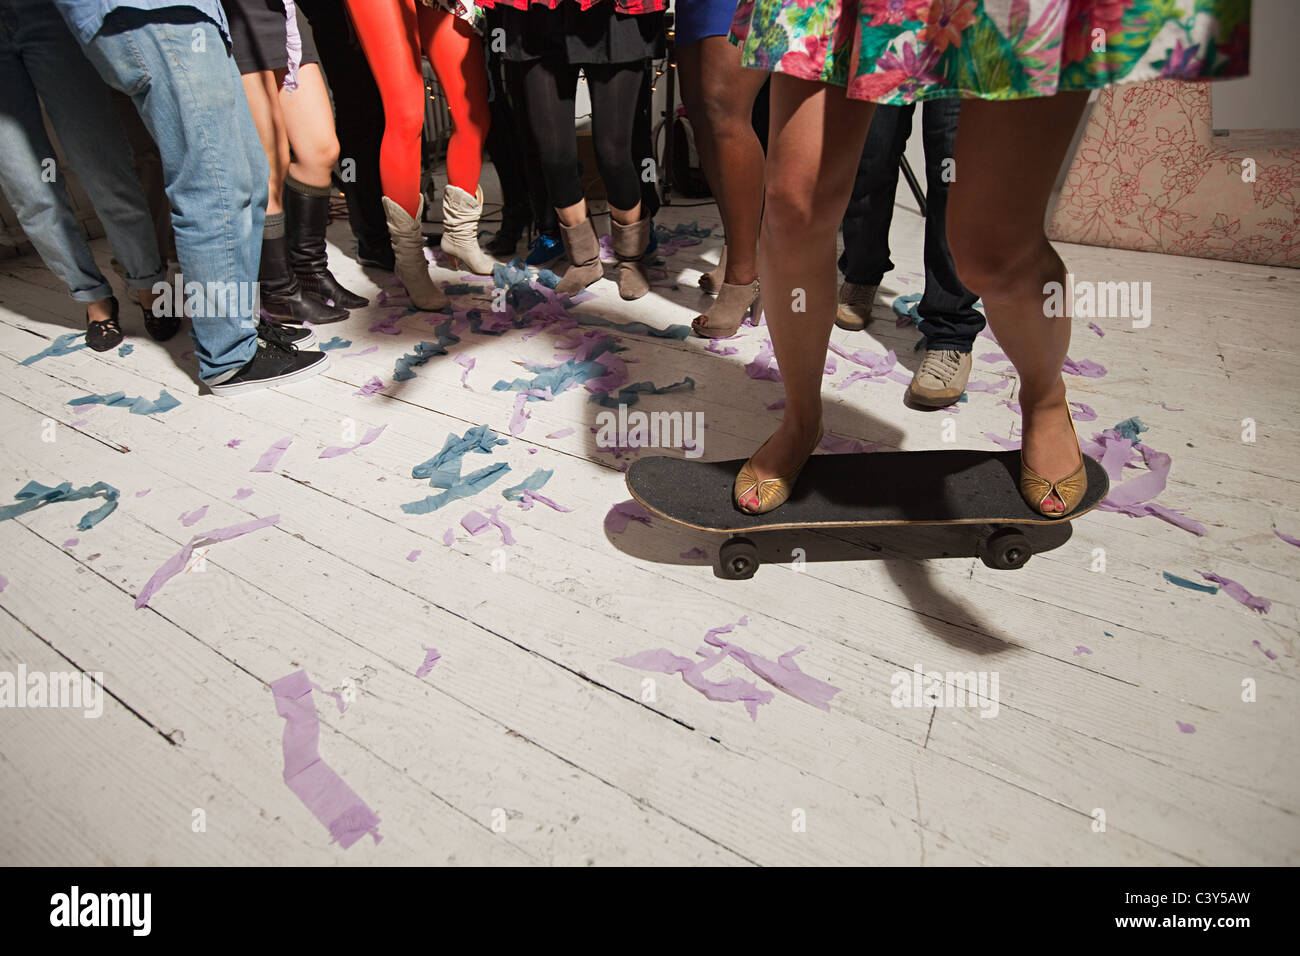 Woman_standing_on_skateboard_at_party-C3